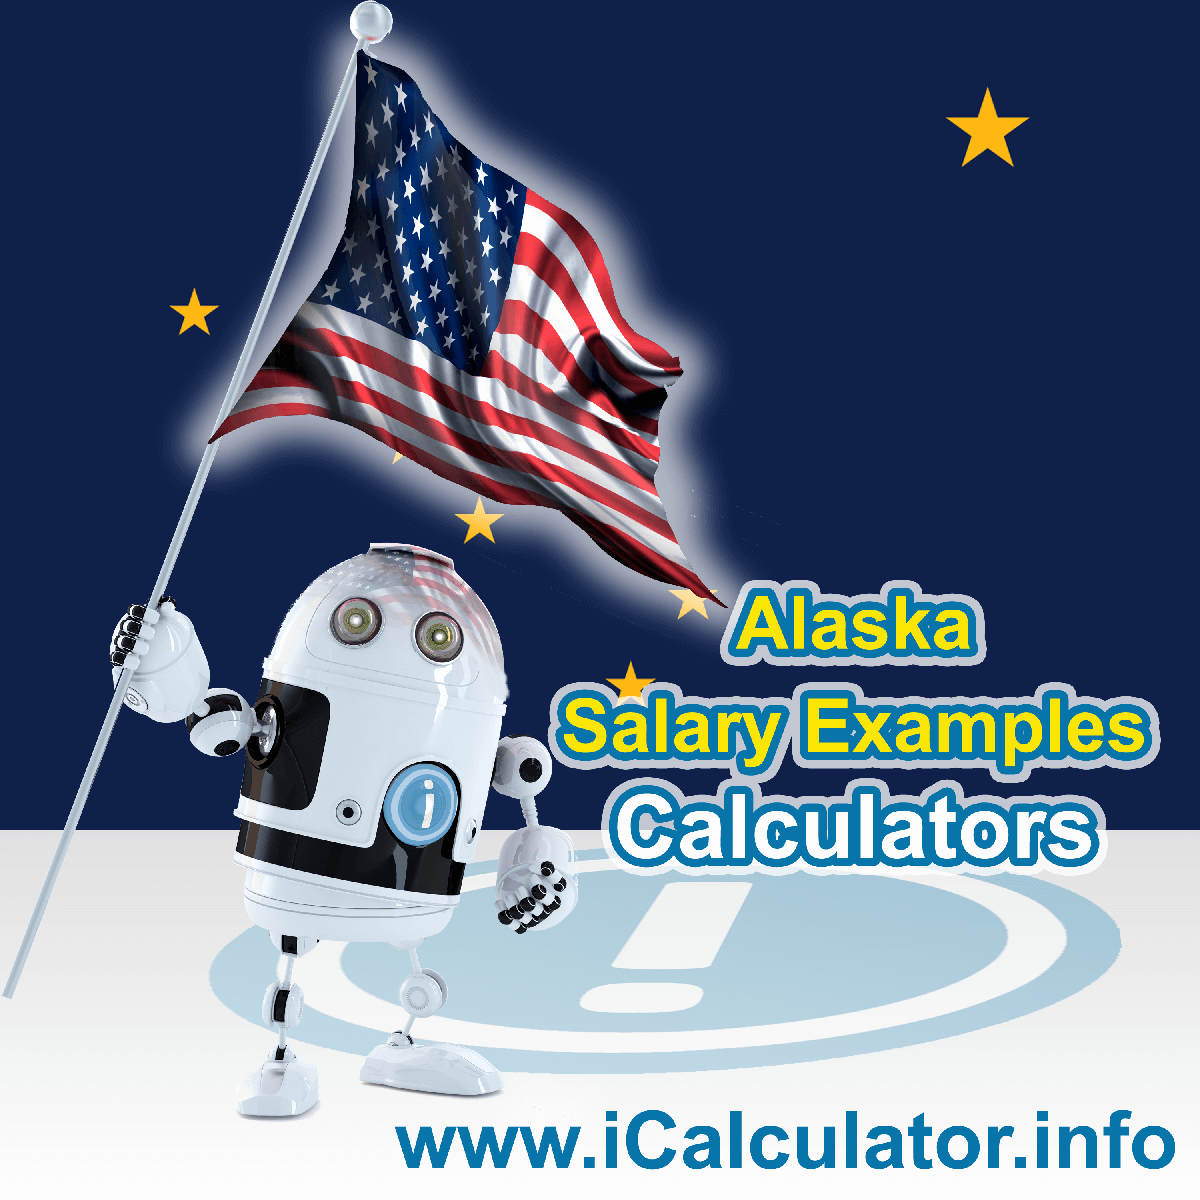 Alaska Salary Example for $ 205,000.00 in 2023 | iCalculator™ | $ 205,000.00 salary example for employee and employer paying Alaska State tincome taxes. Detailed salary after tax calculation including Alaska State Tax, Federal State Tax, Medicare Deductions, Social Security, Capital Gains and other income tax and salary deductions complete with supporting Alaska state tax tables 